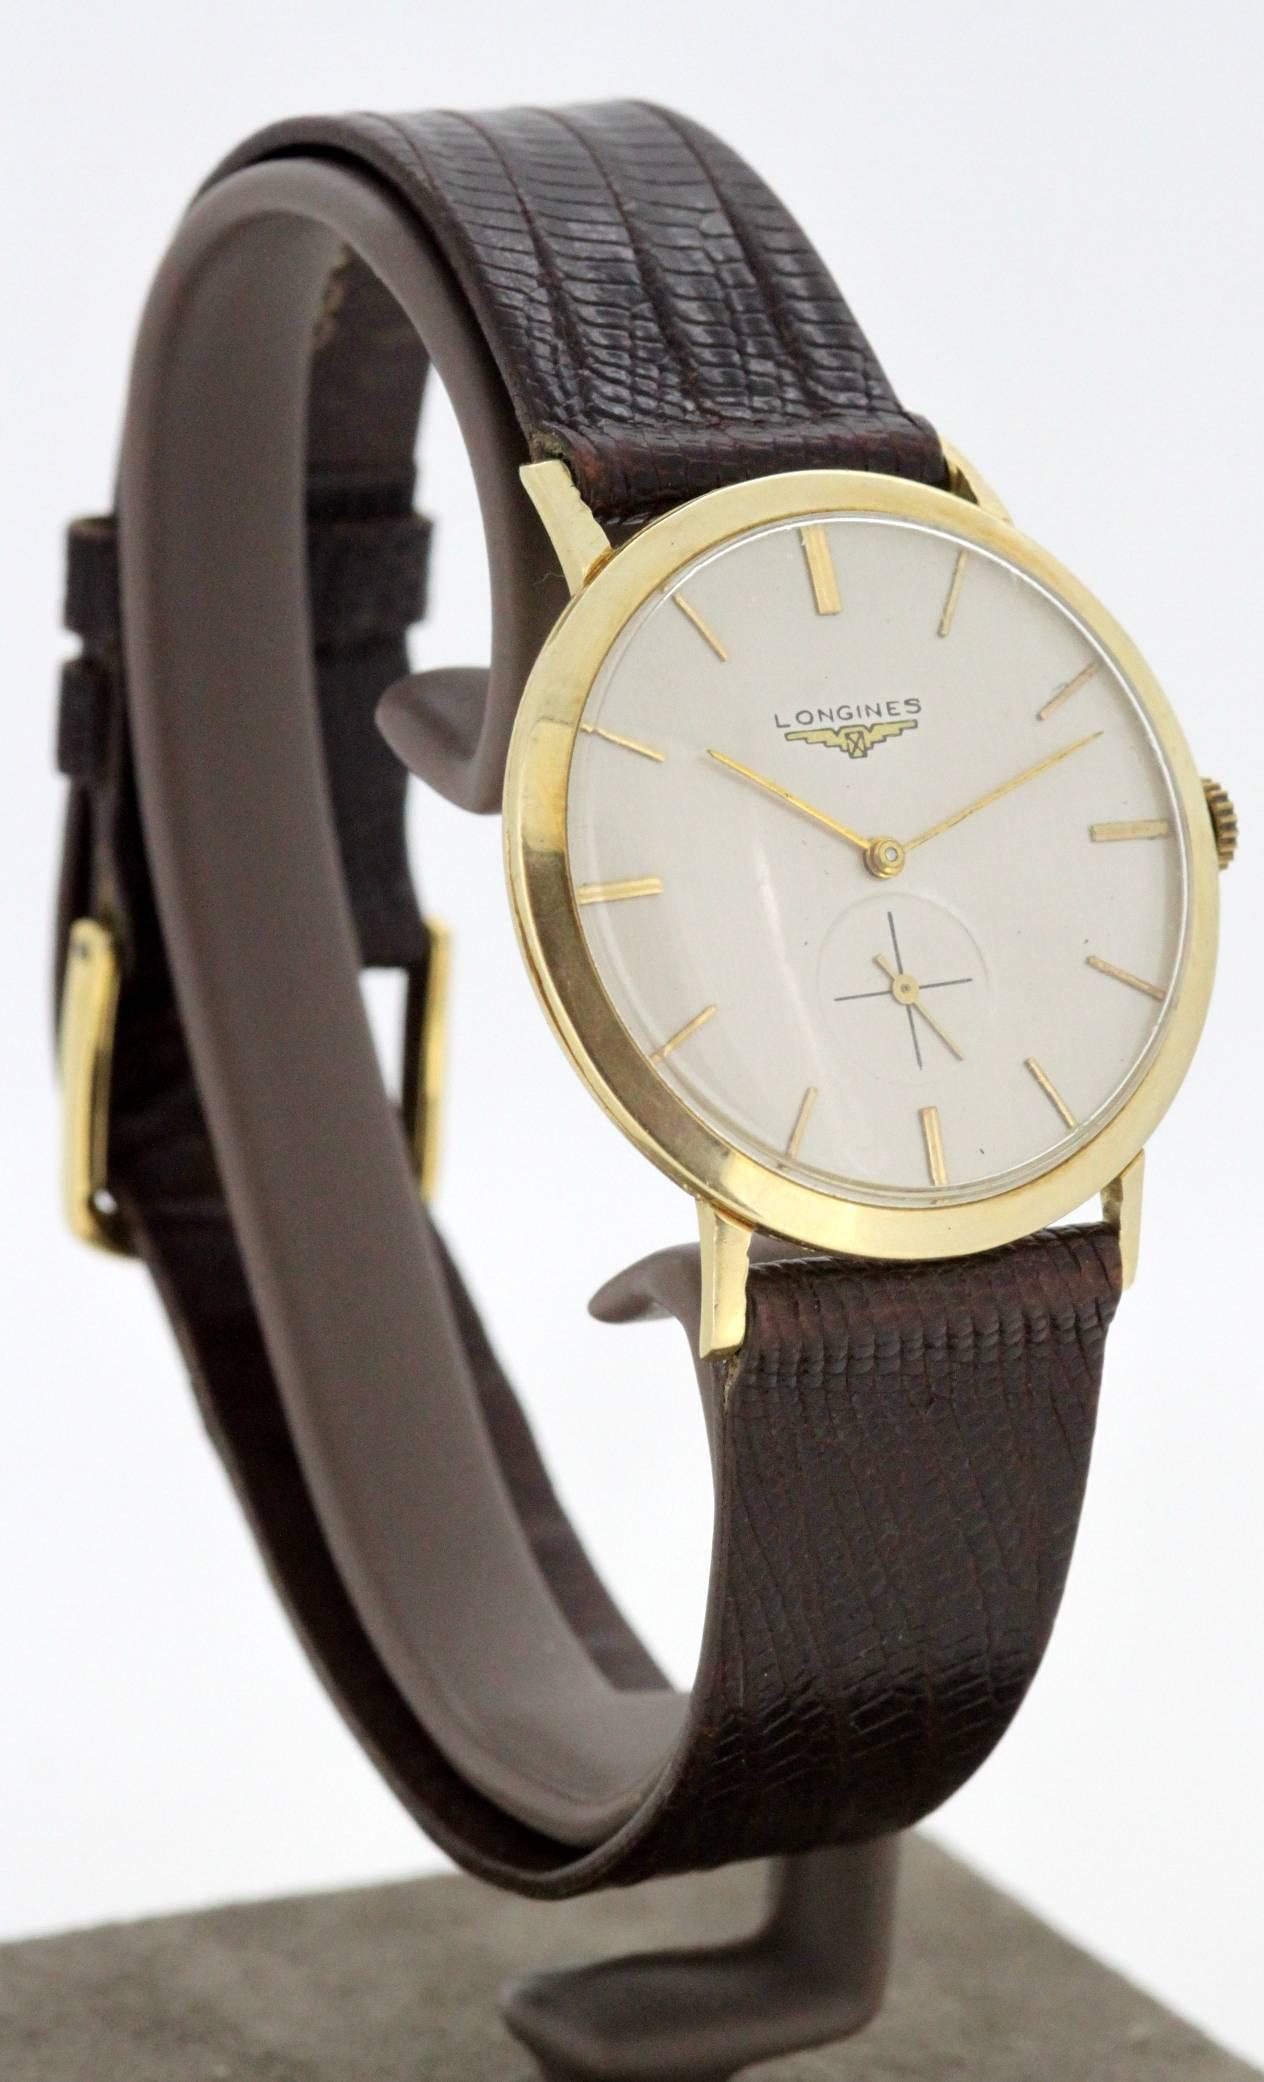 Vintage Longines 14K Yellow Gold Mens Wristwatch
Circa.1960's

Gender: Mens
Case size: 37 x 34  mm
Movement: Manual Winding
Watchband Material: Leather
Case material : 14K Gold
Display Type:	Analogue	
Dial: ( See Photos )
Hands: Gold
Clasp : Strap